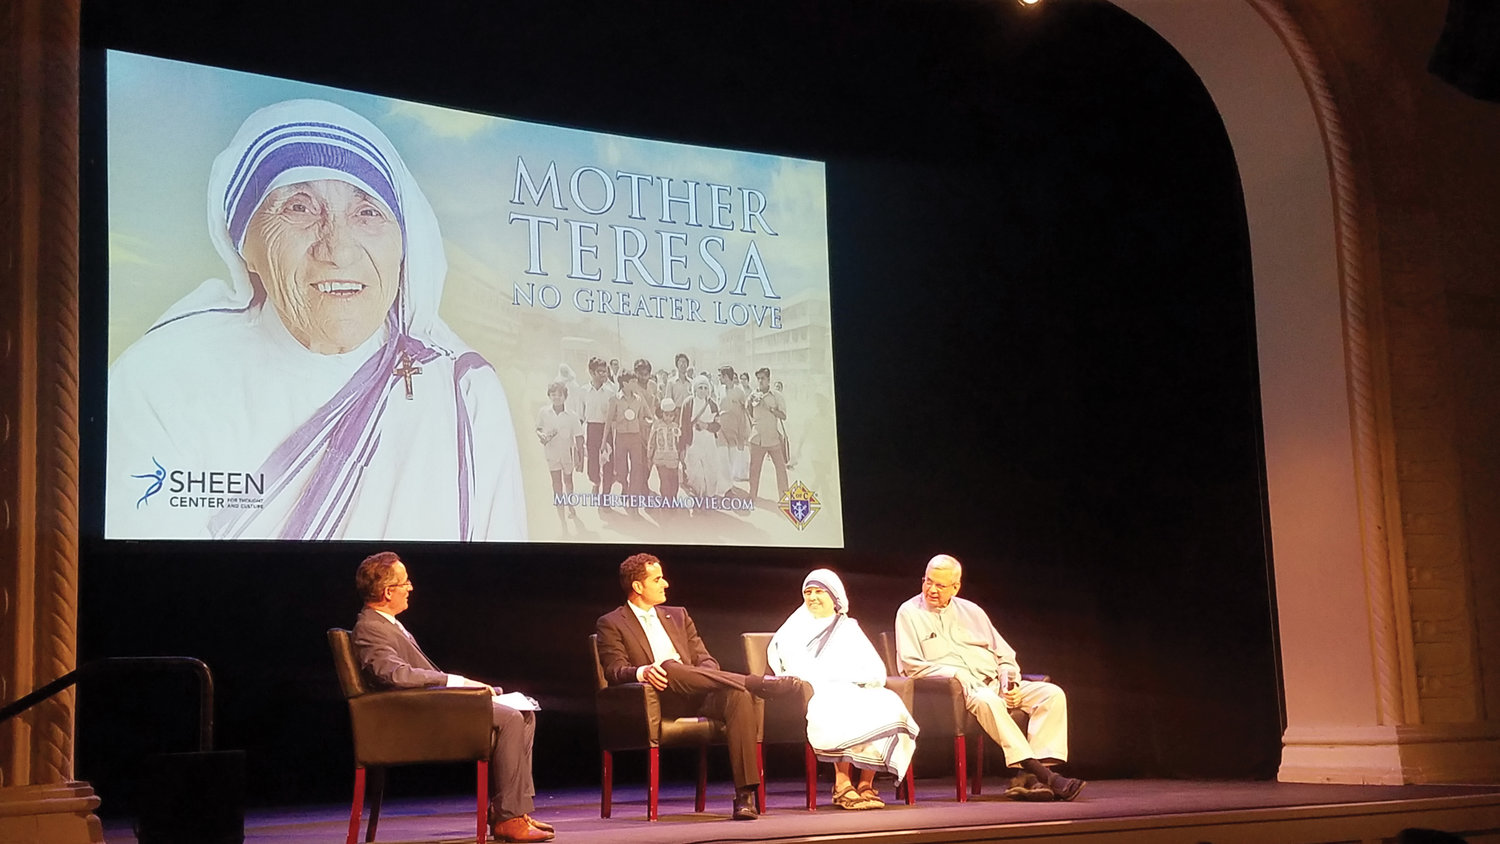 A panel discussion followed the screening. From left: moderator David DiCerto of the Sheen Center; David Naglieri, director and producer of the film; Sister M. Clare, M.C.; and Father Brian Kolodiejchuk, M.C.